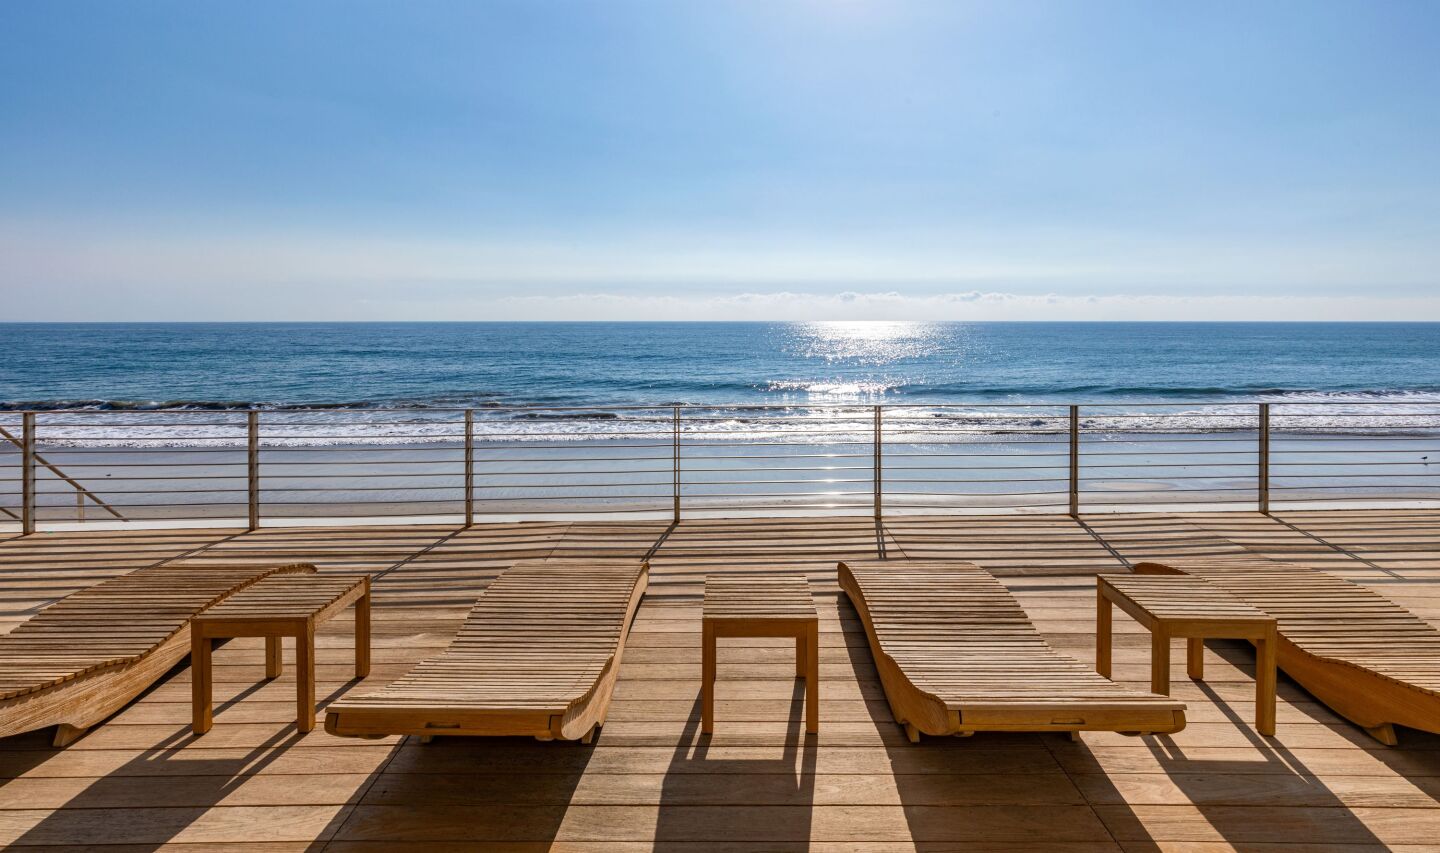 Chaise longues sit on a wooden deck with an uninterrupted view of the surf.